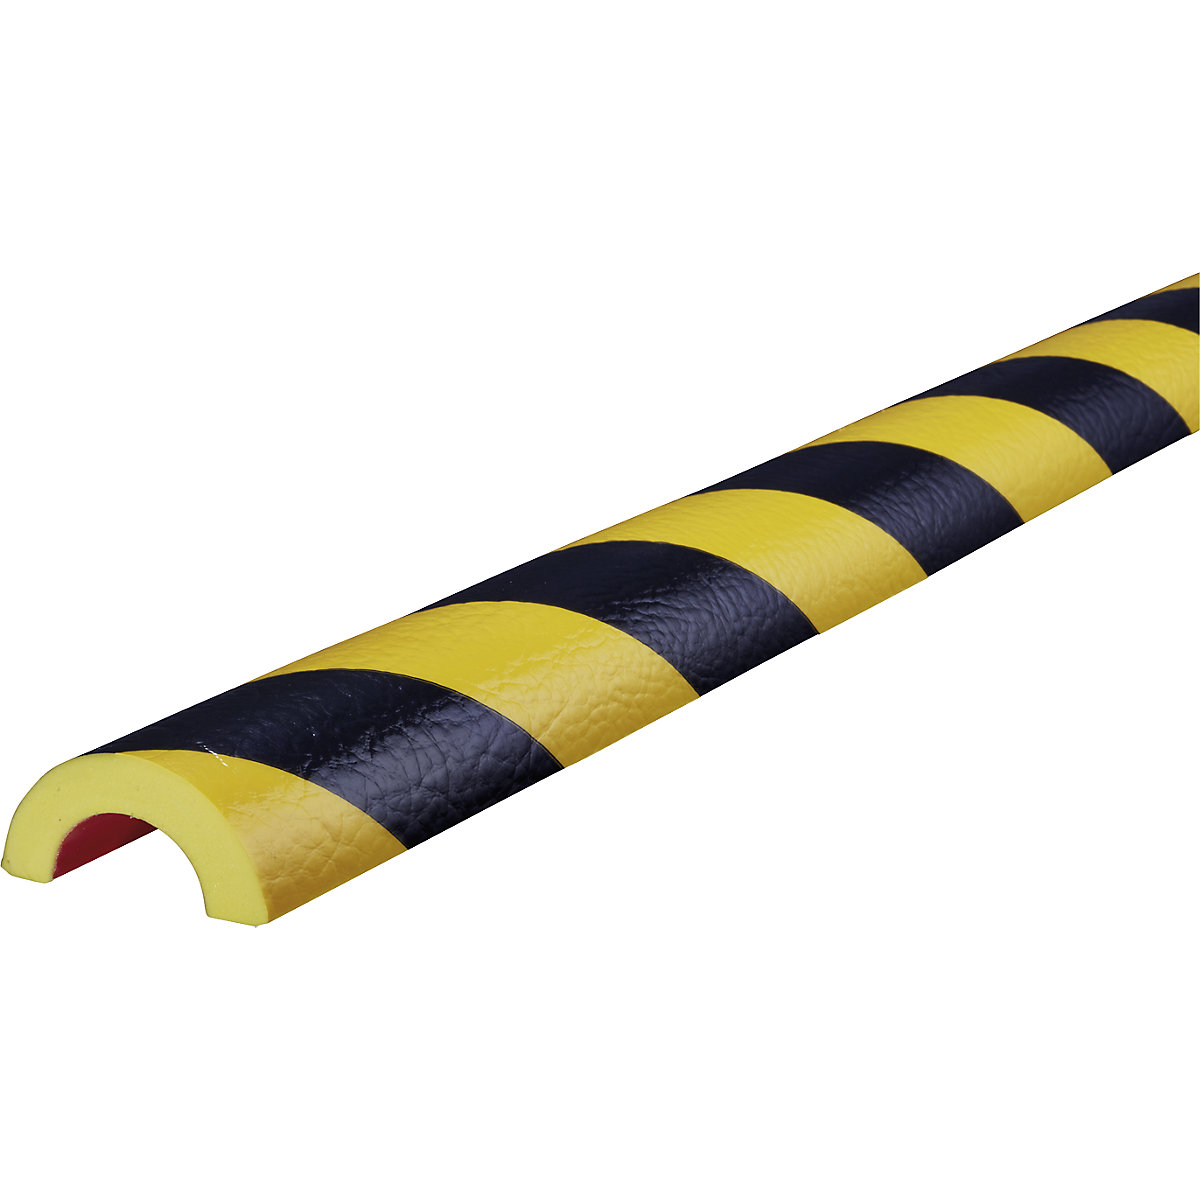 Knuffi® pipe protection – SHG, type R30, 1 x 5 m roll, black / yellow-11